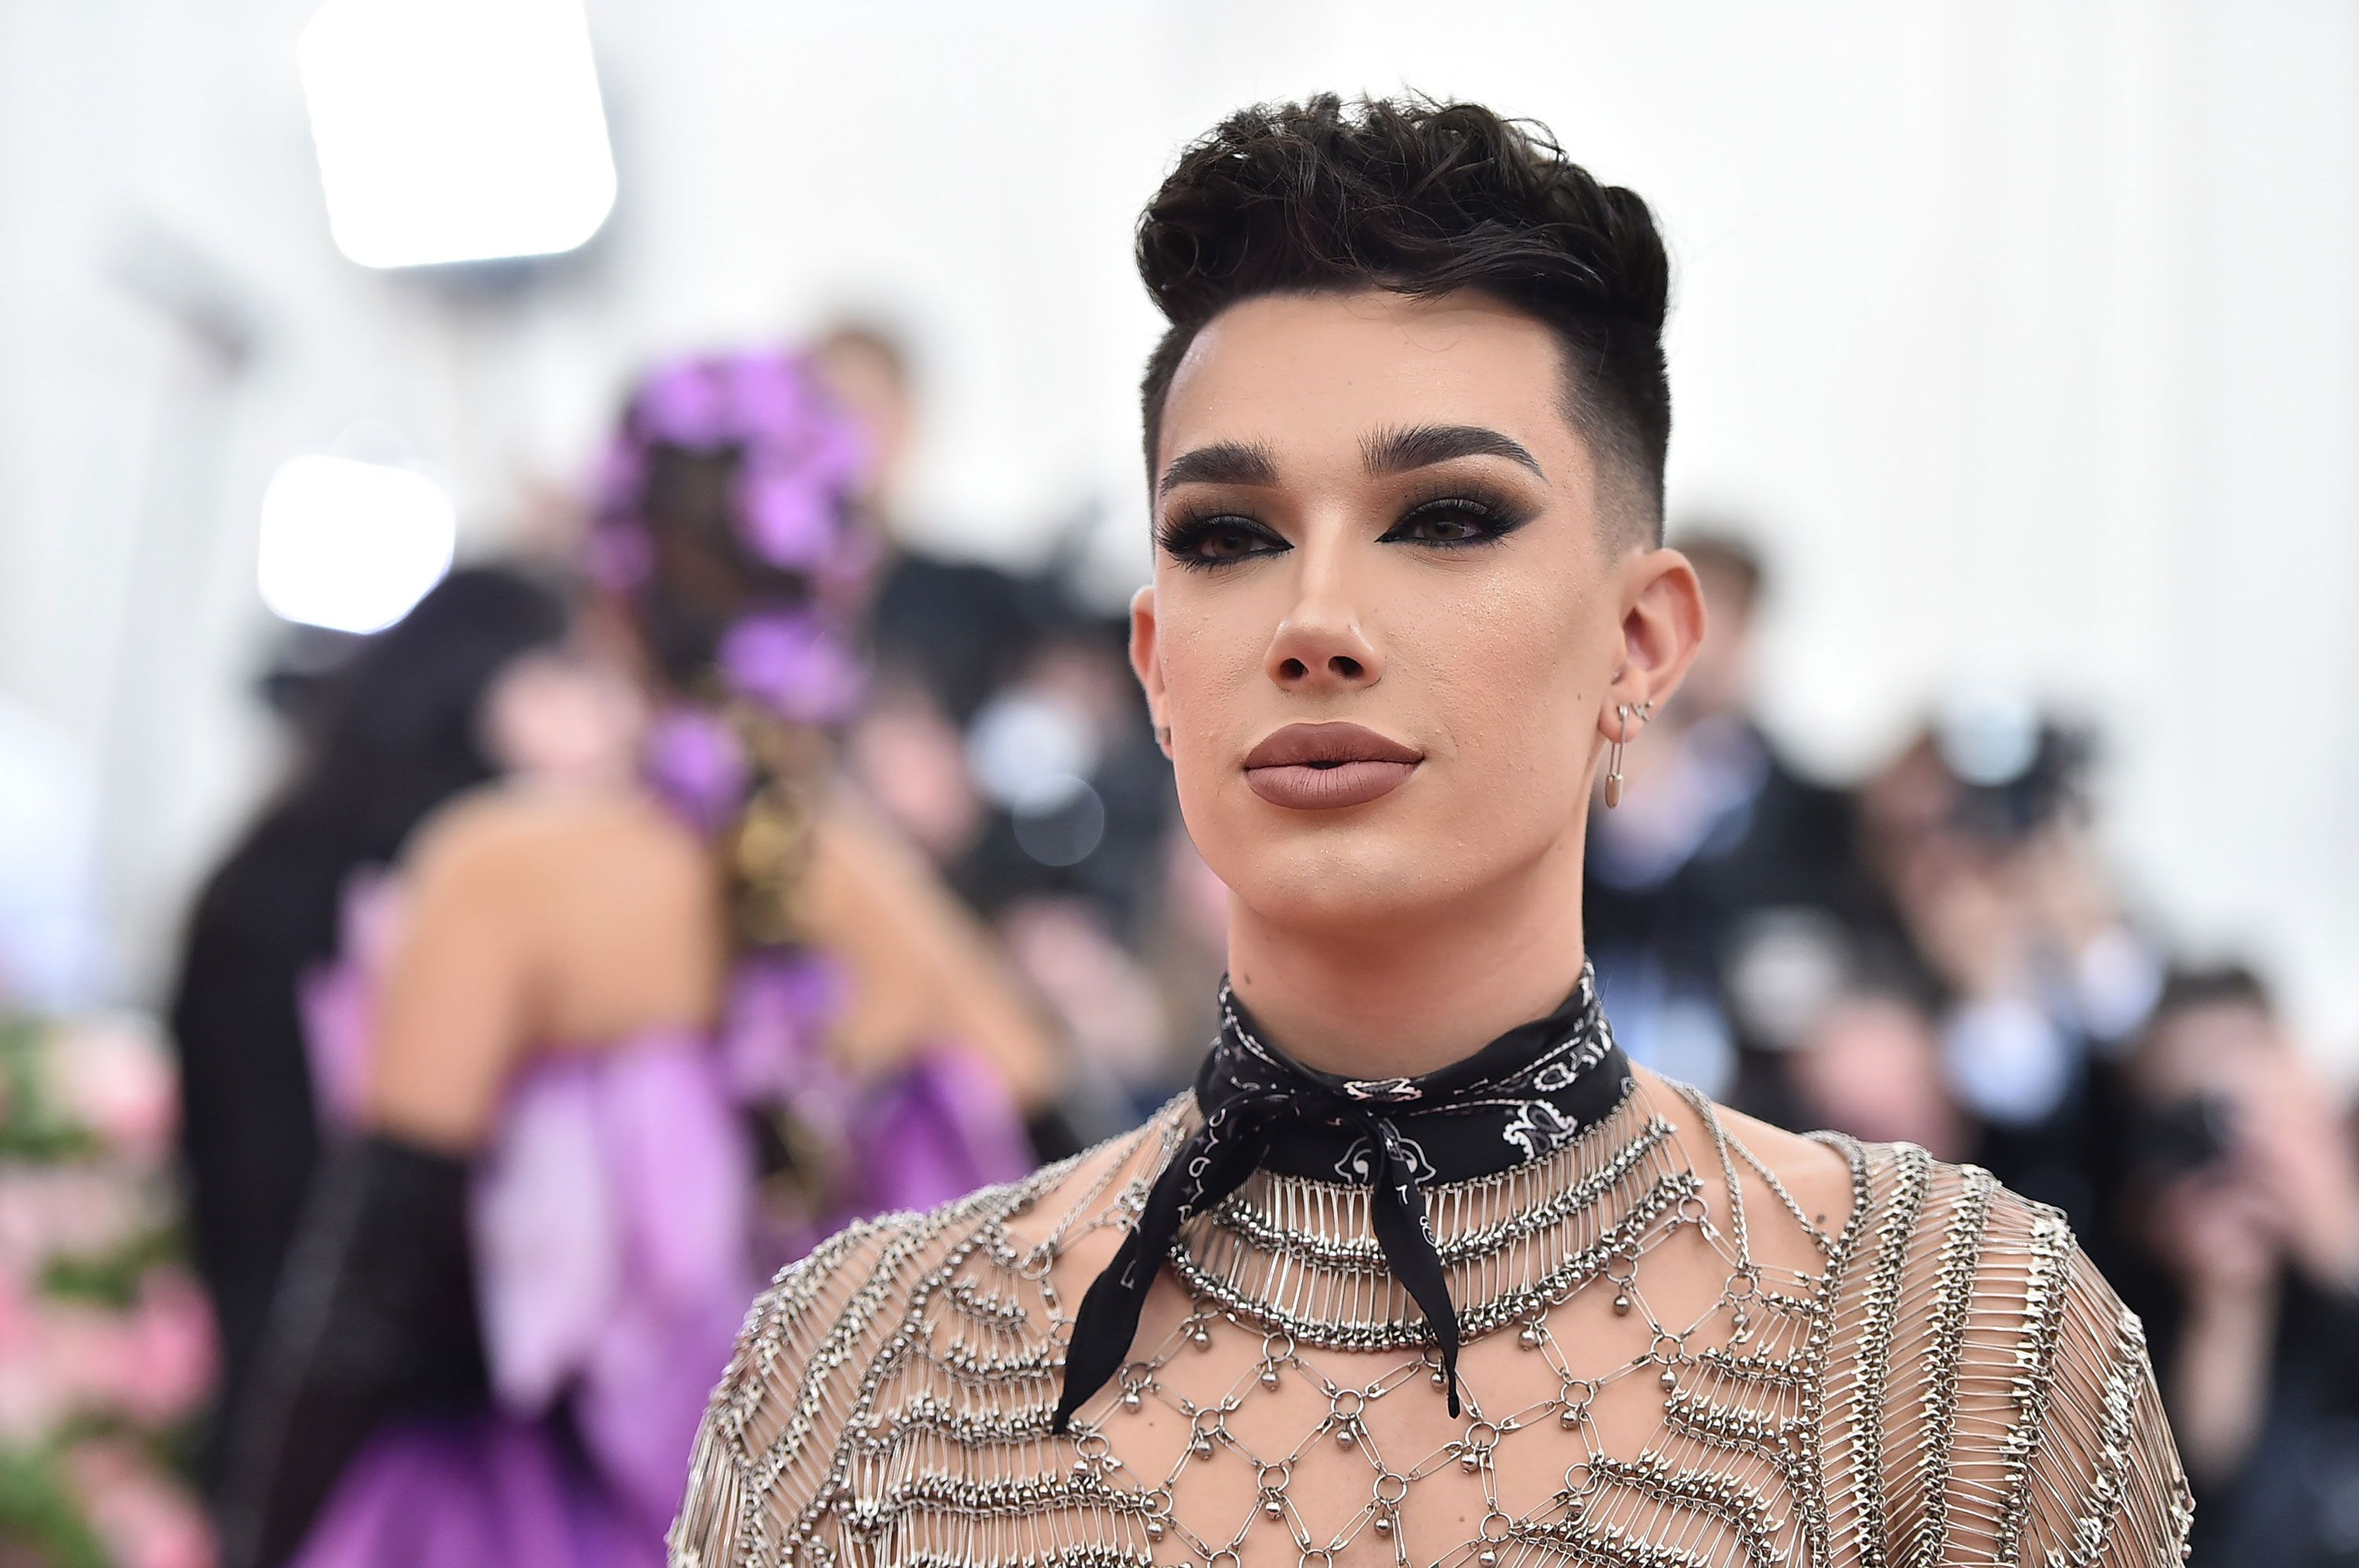 Who Is James Charles? His Subscriber Count Why He's Famous ...